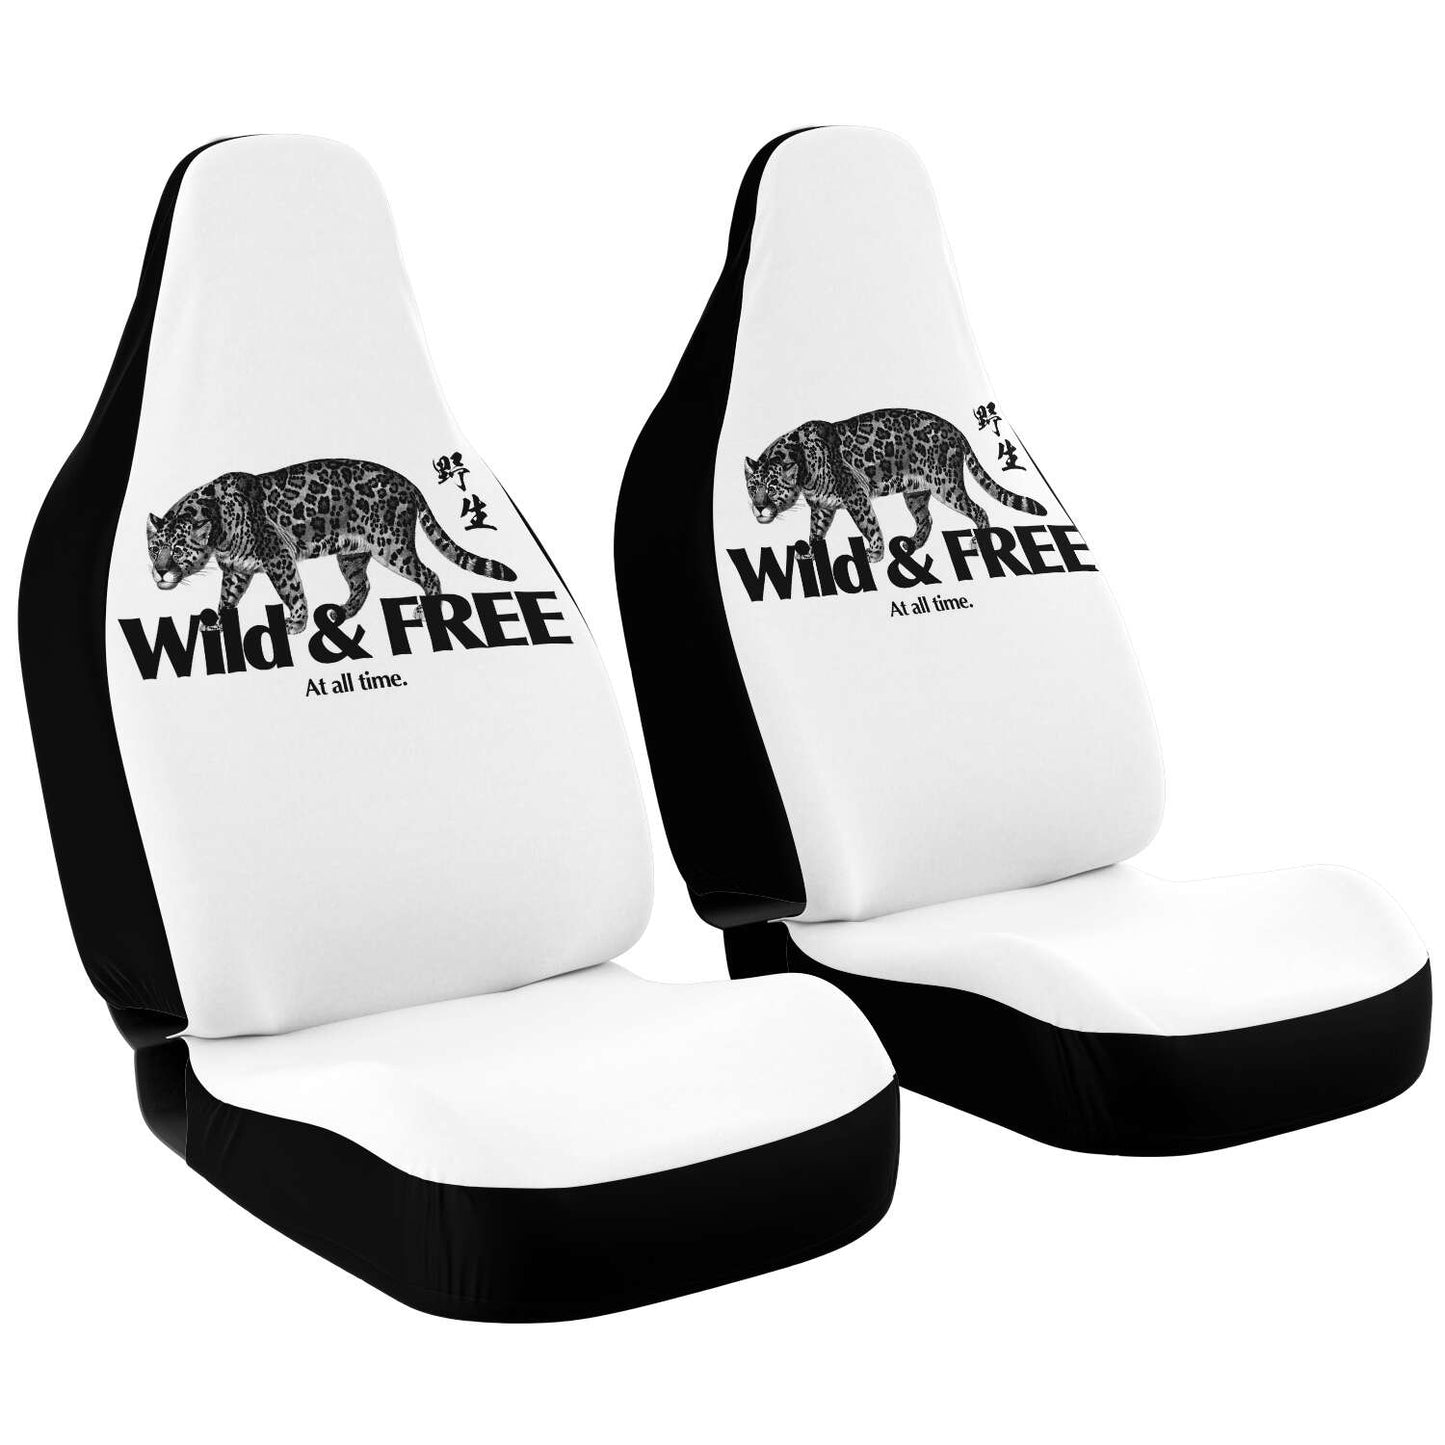 Wild & Free, at all time. 🐯 Panther Seat Covers White